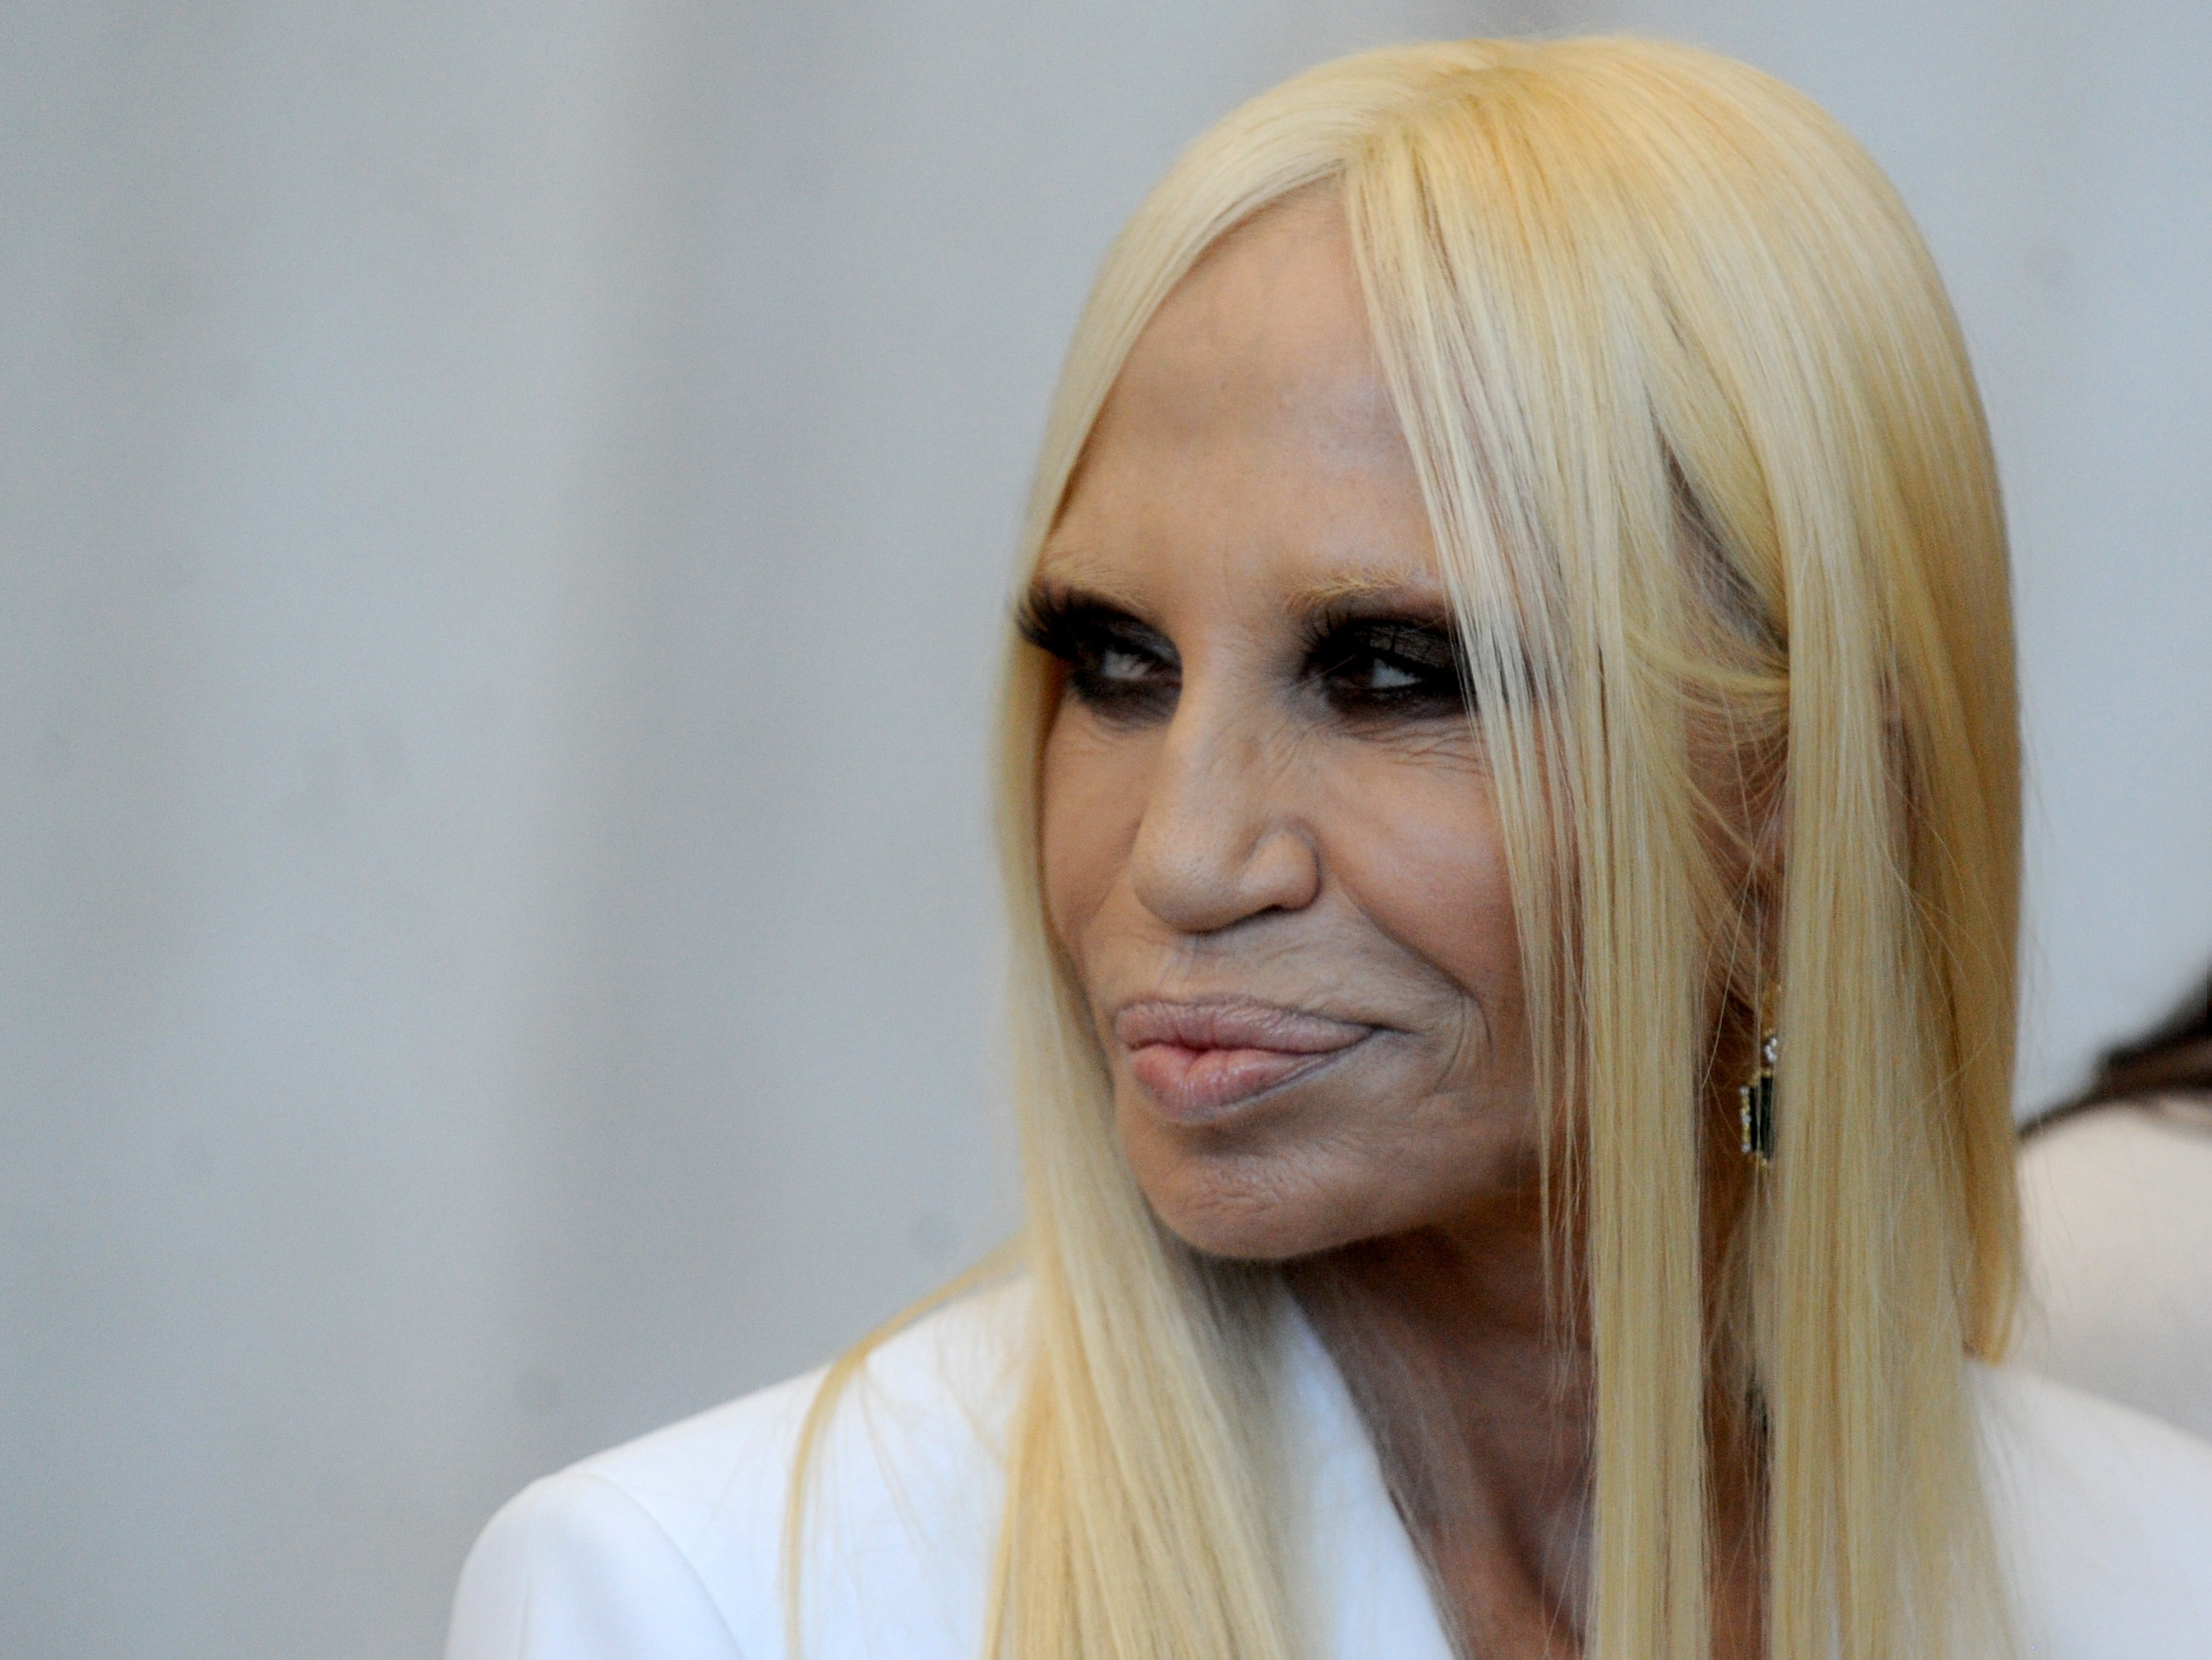 kleding stof Vermelding Ontkennen Donatella Versace To Be Honoured At The Fashion Awards 2017 | Fashion News  - Conversations About HER